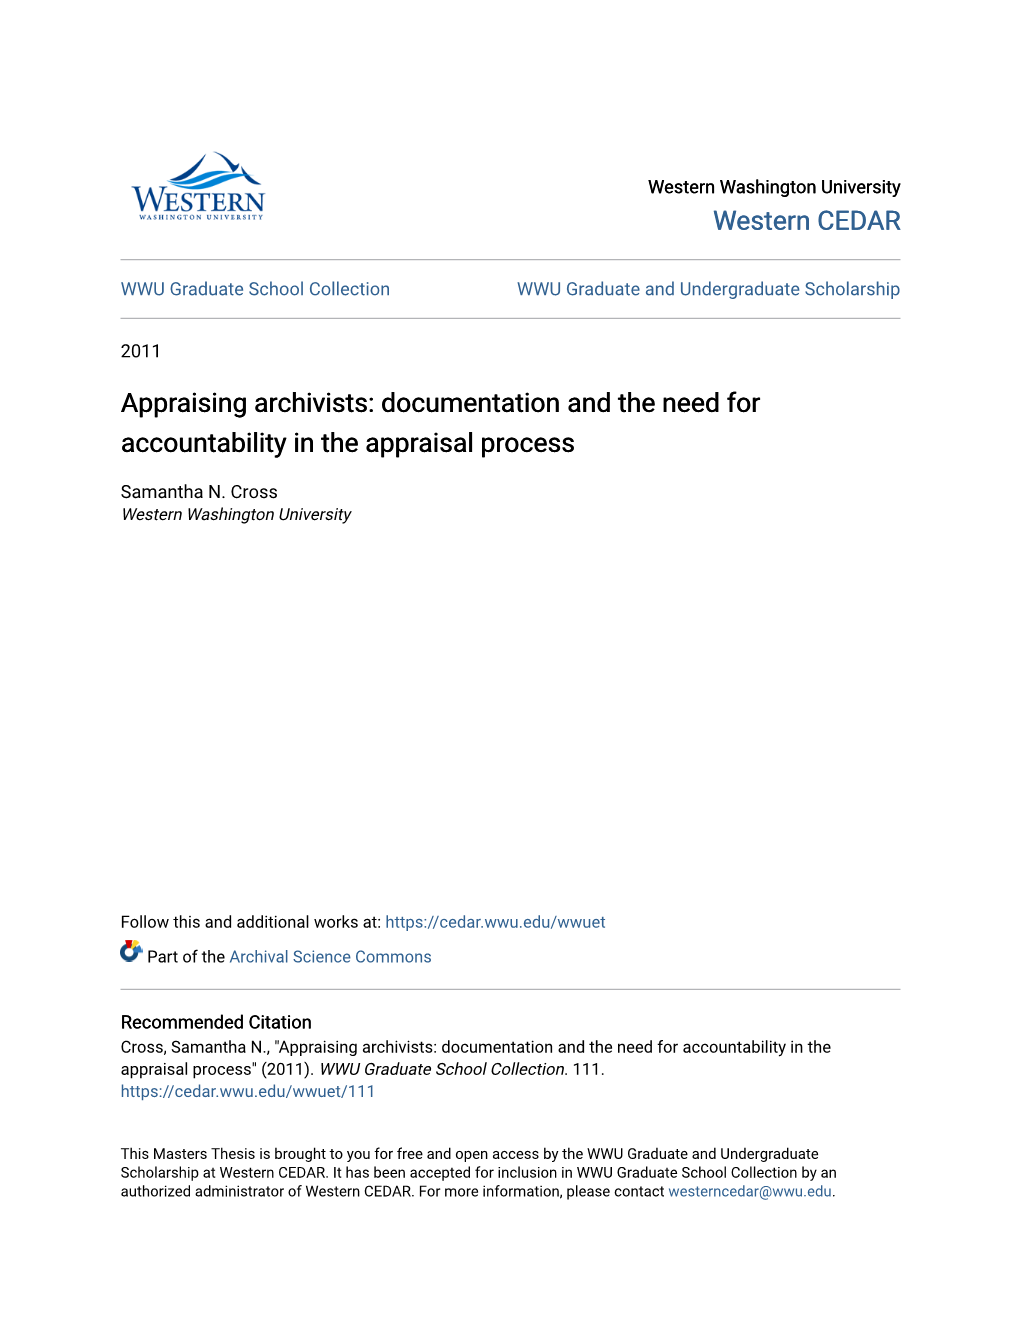 Appraising Archivists: Documentation and the Need for Accountability in the Appraisal Process